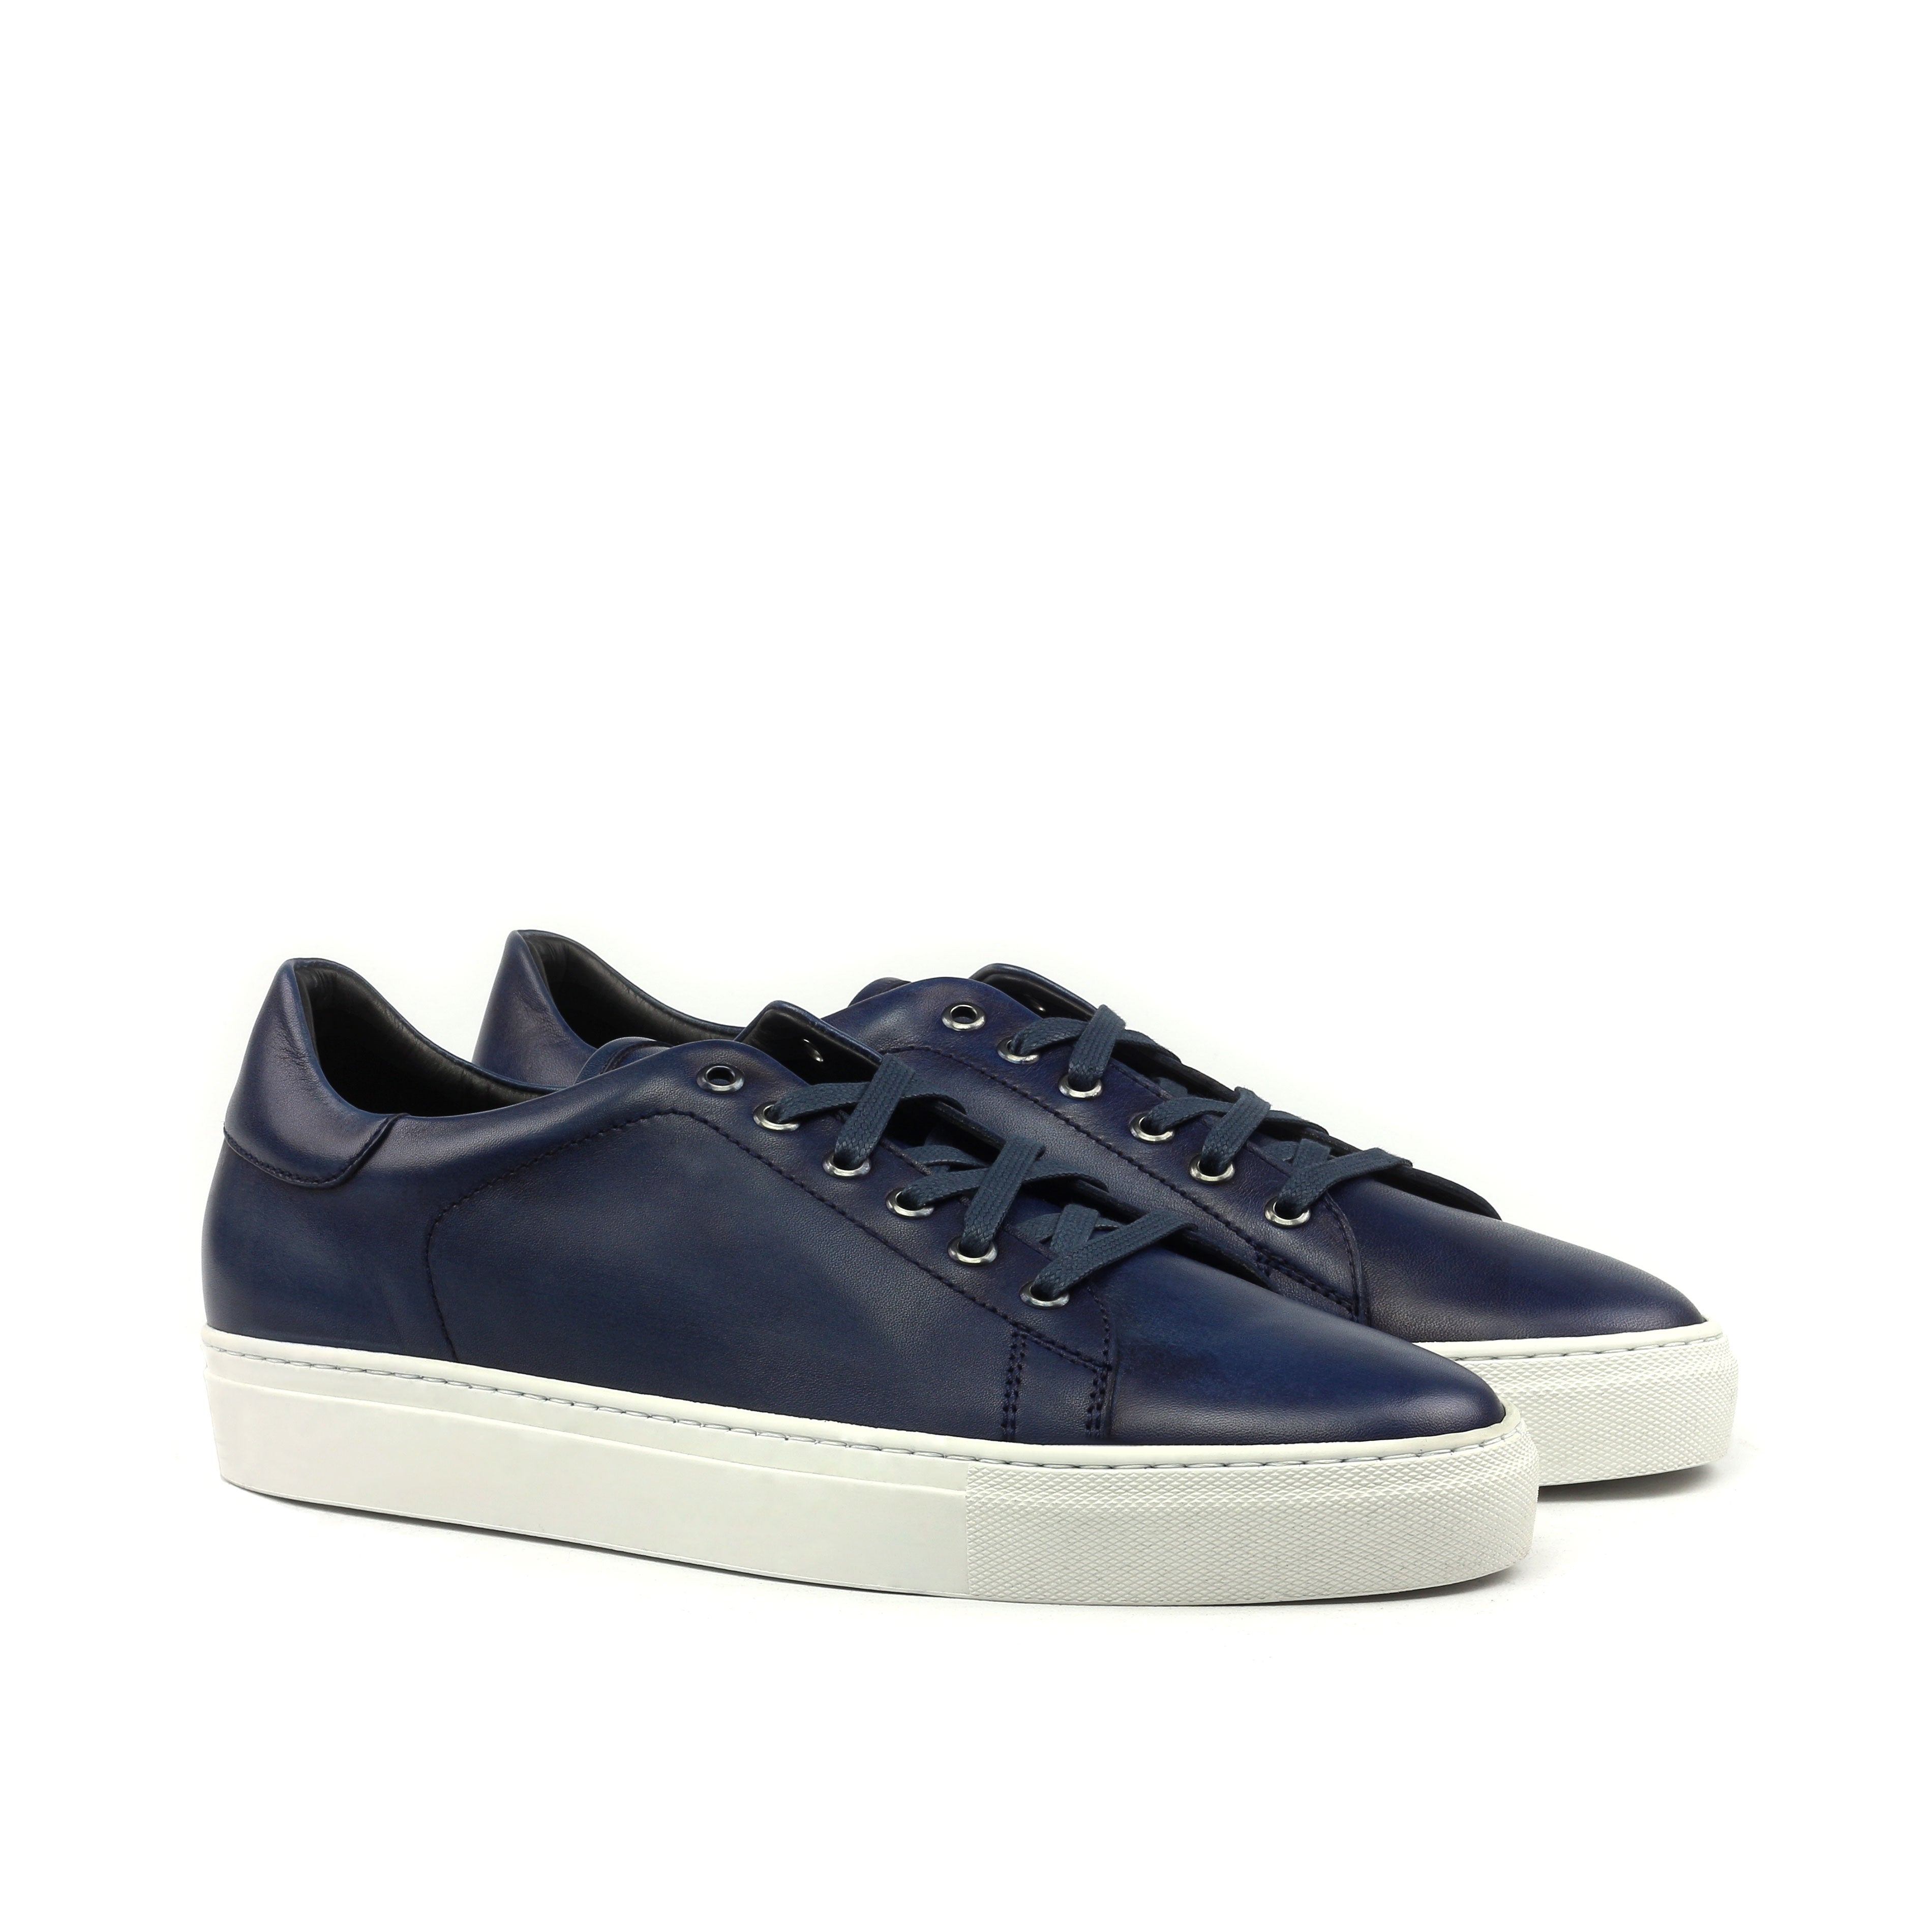 Sneakers Navy leather